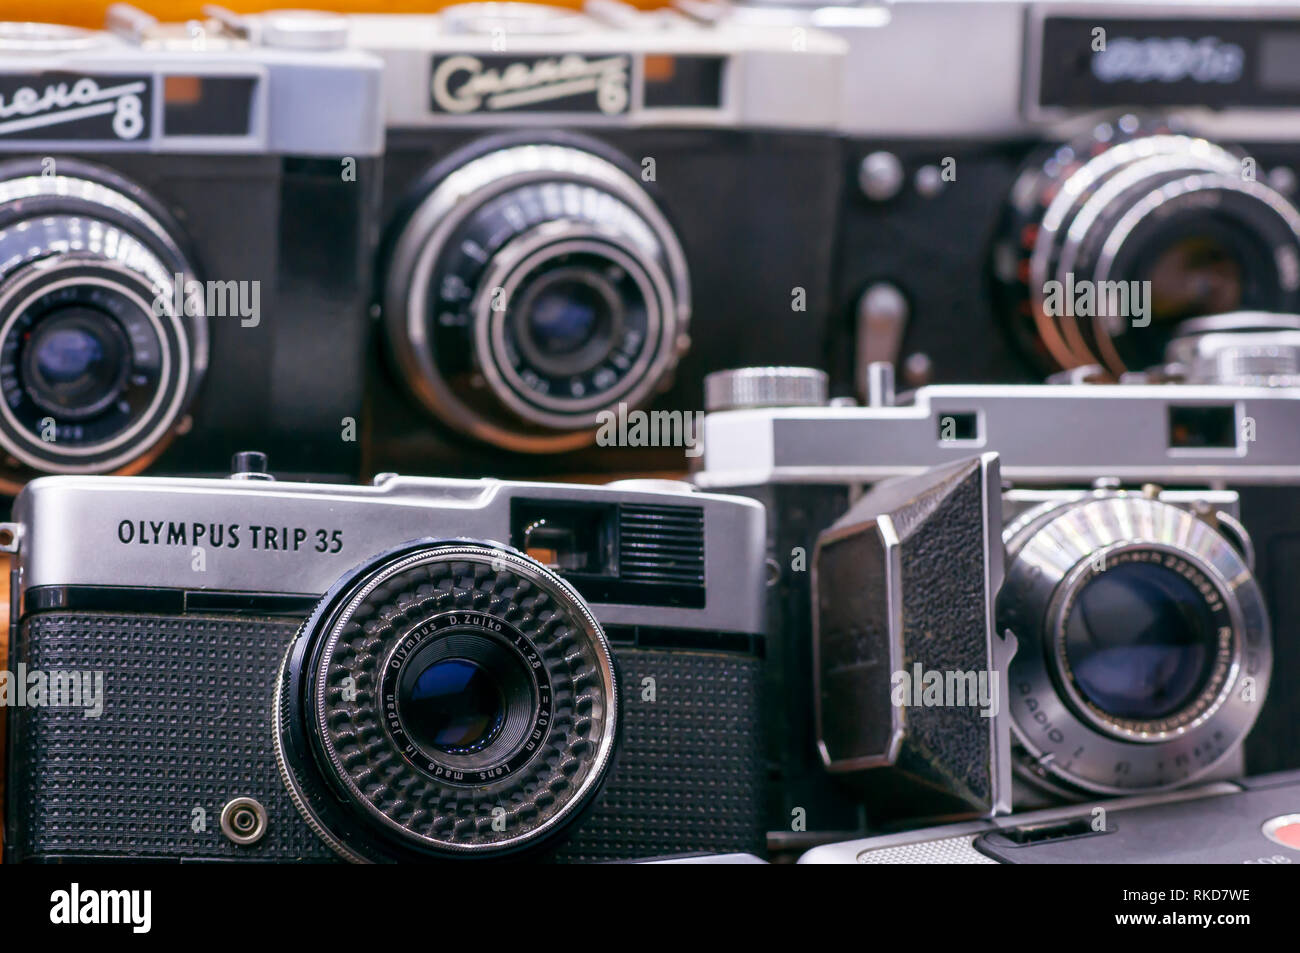 Wroclaw, Poland, February 2019. Private collection of vintage old cameras. Stock Photo